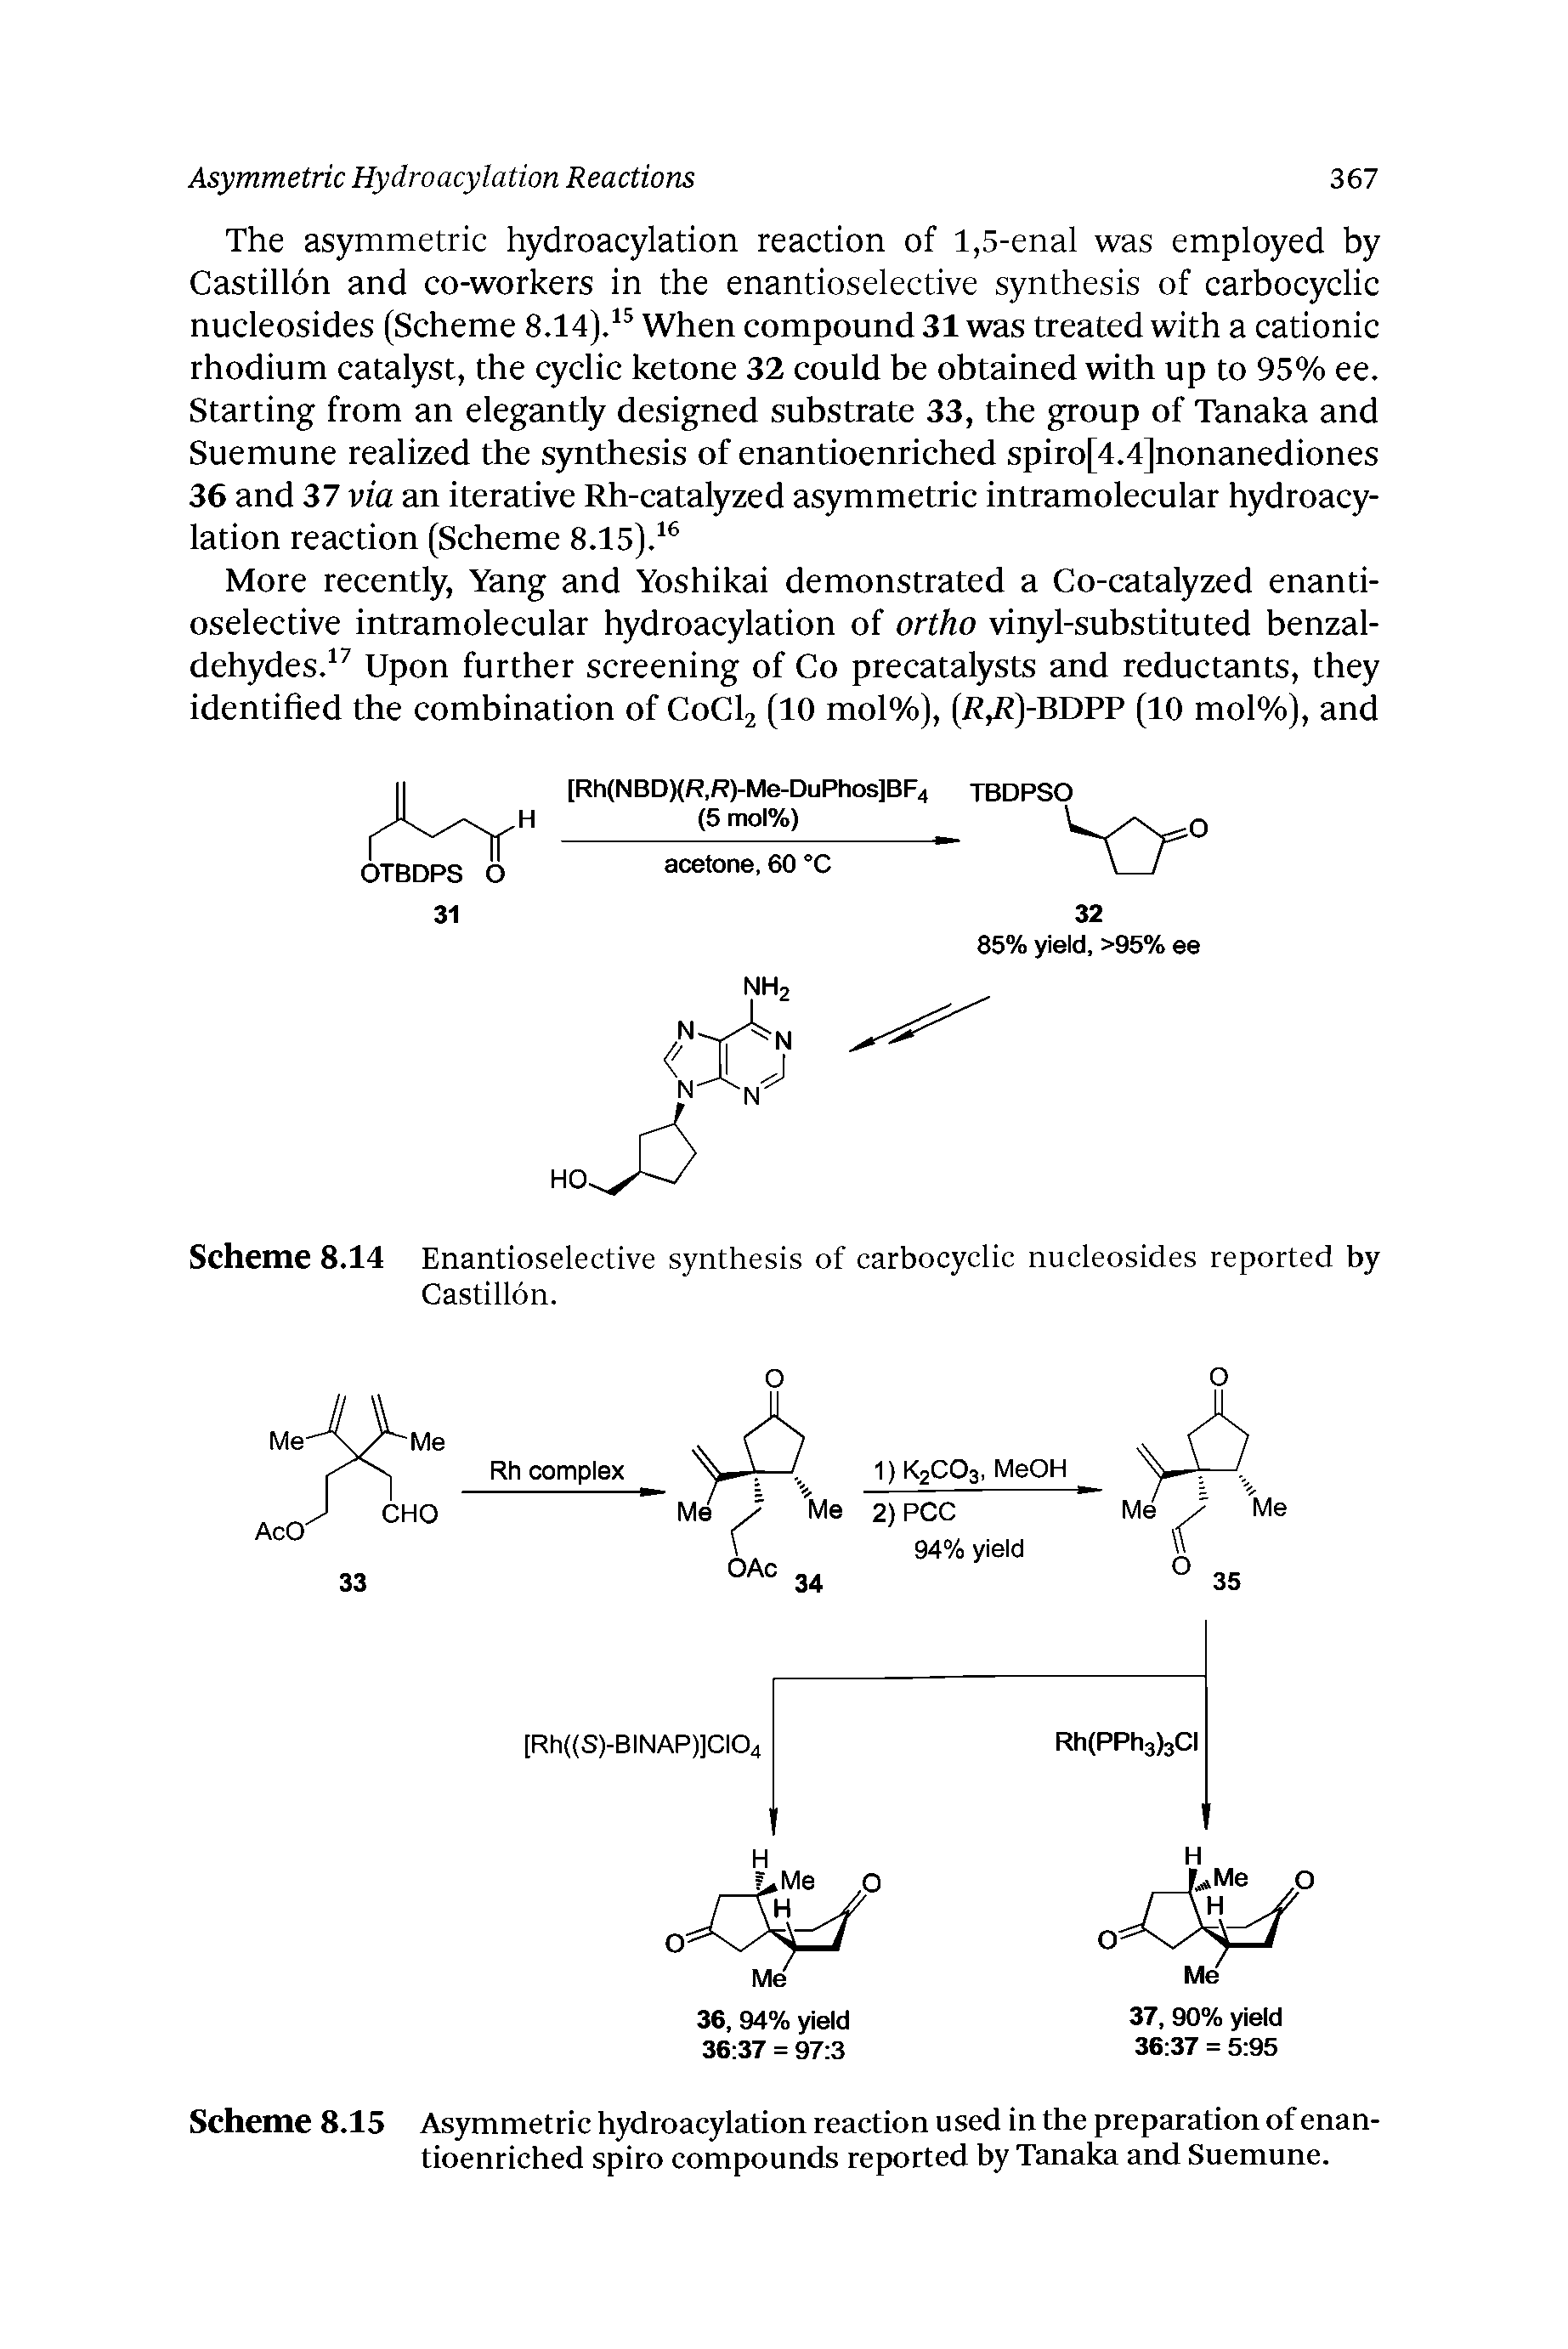 Scheme 8.15 As)nnmetric hydroacylation reaction used in the preparation of enantioenriched spiro compounds reported by Tanaka and Suemune.